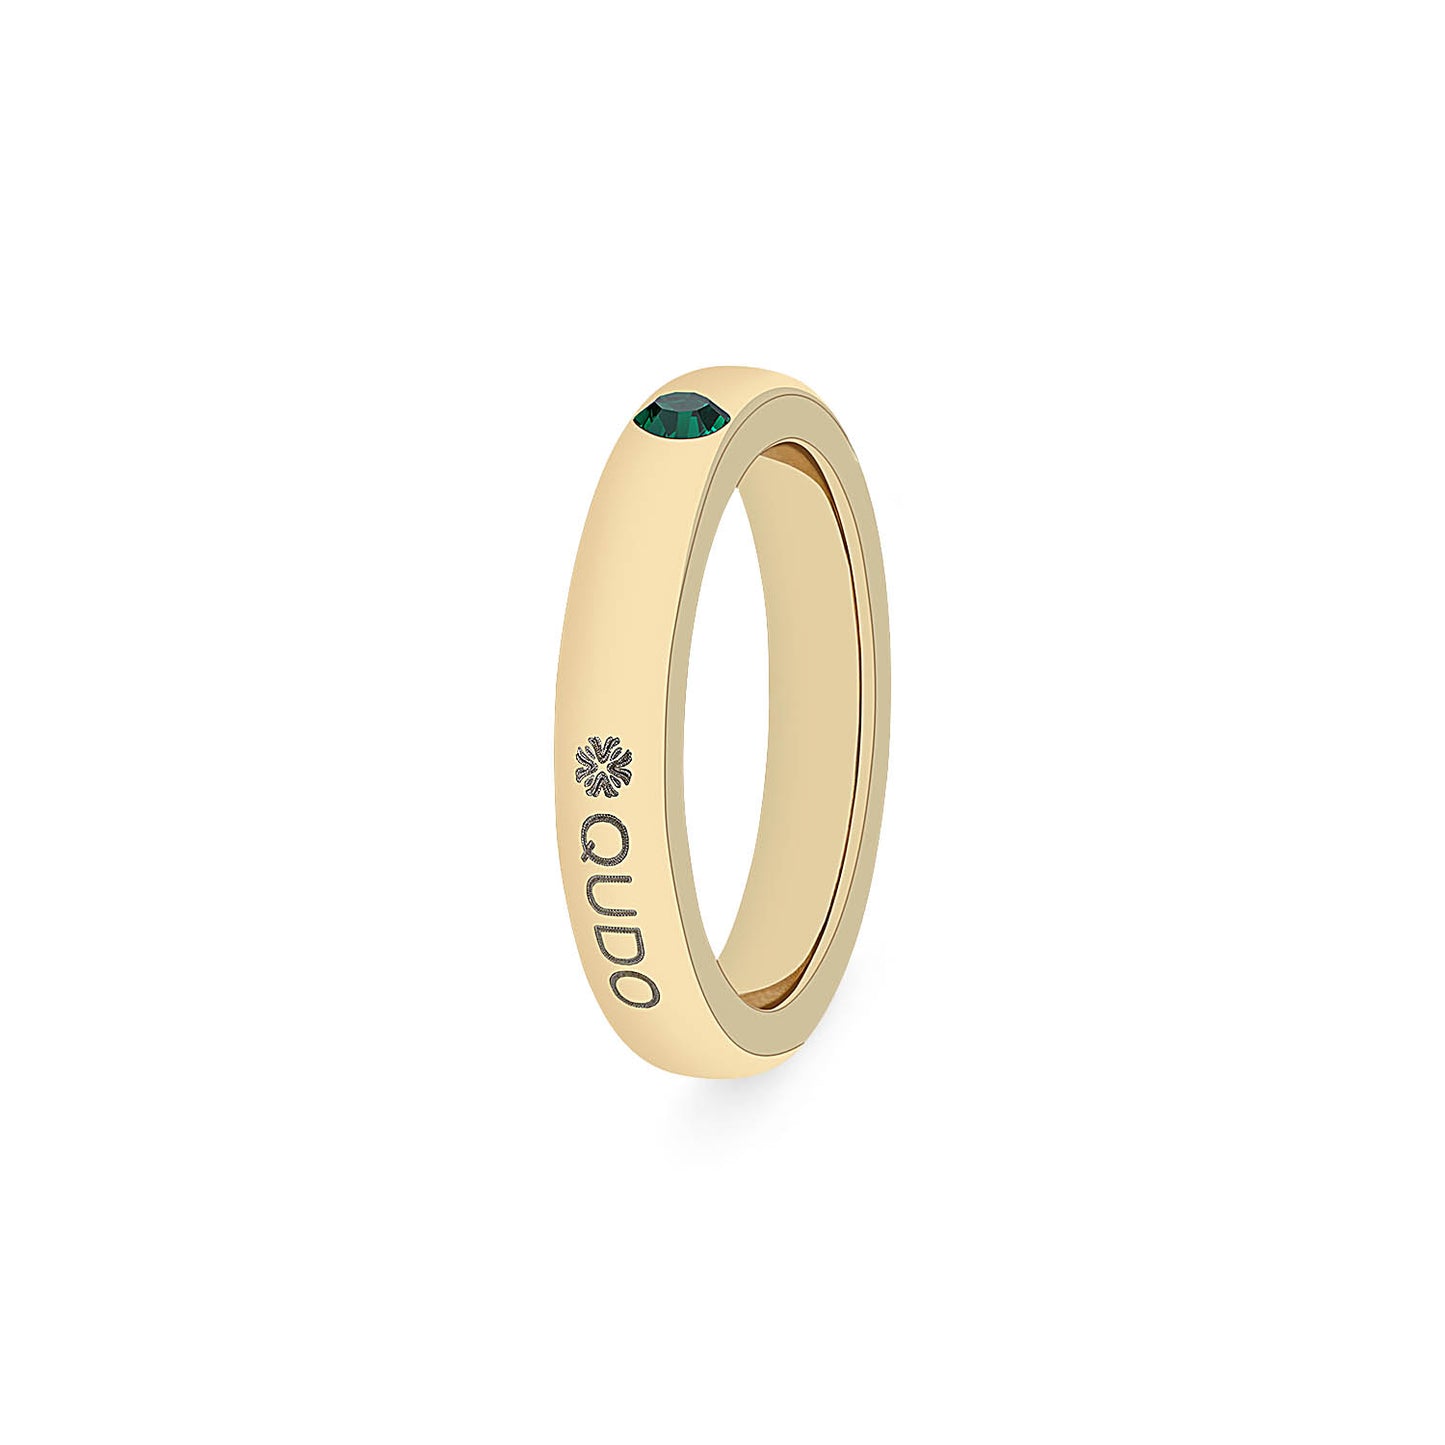 Saria Ring in Gold - Emerald